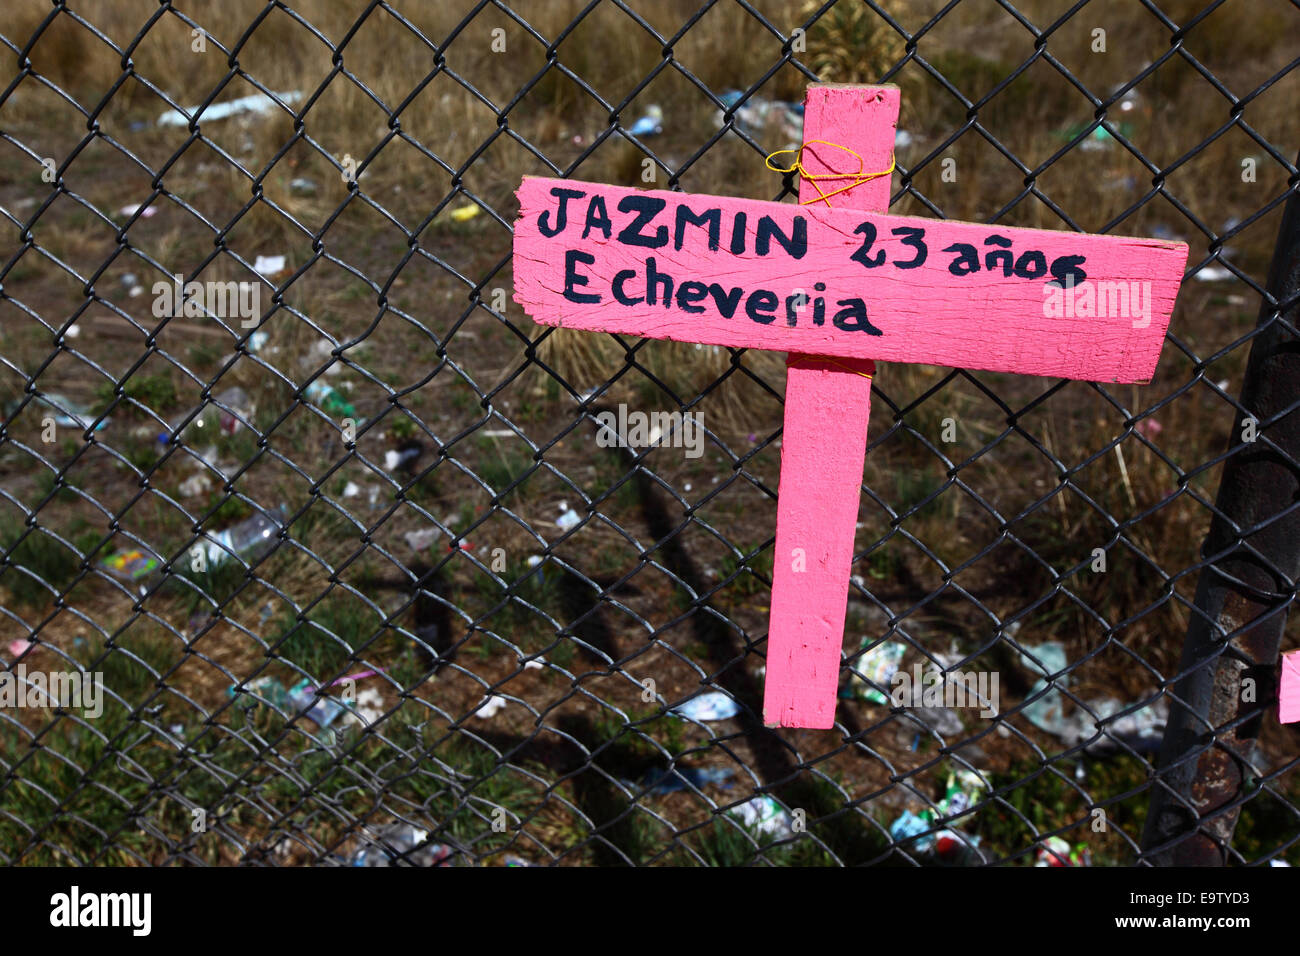 EL ALTO, BOLIVIA, 2nd November 2014. A pink cross with the name of a young 23 year old woman on a wire mesh fence, part of a memorial for recent victims of femicide and domestic violence against women. According to a WHO report in January 2013 Bolivia is the country with the highest rate of violence against women in Latin America. Credit:  James Brunker / Alamy Live News Stock Photo